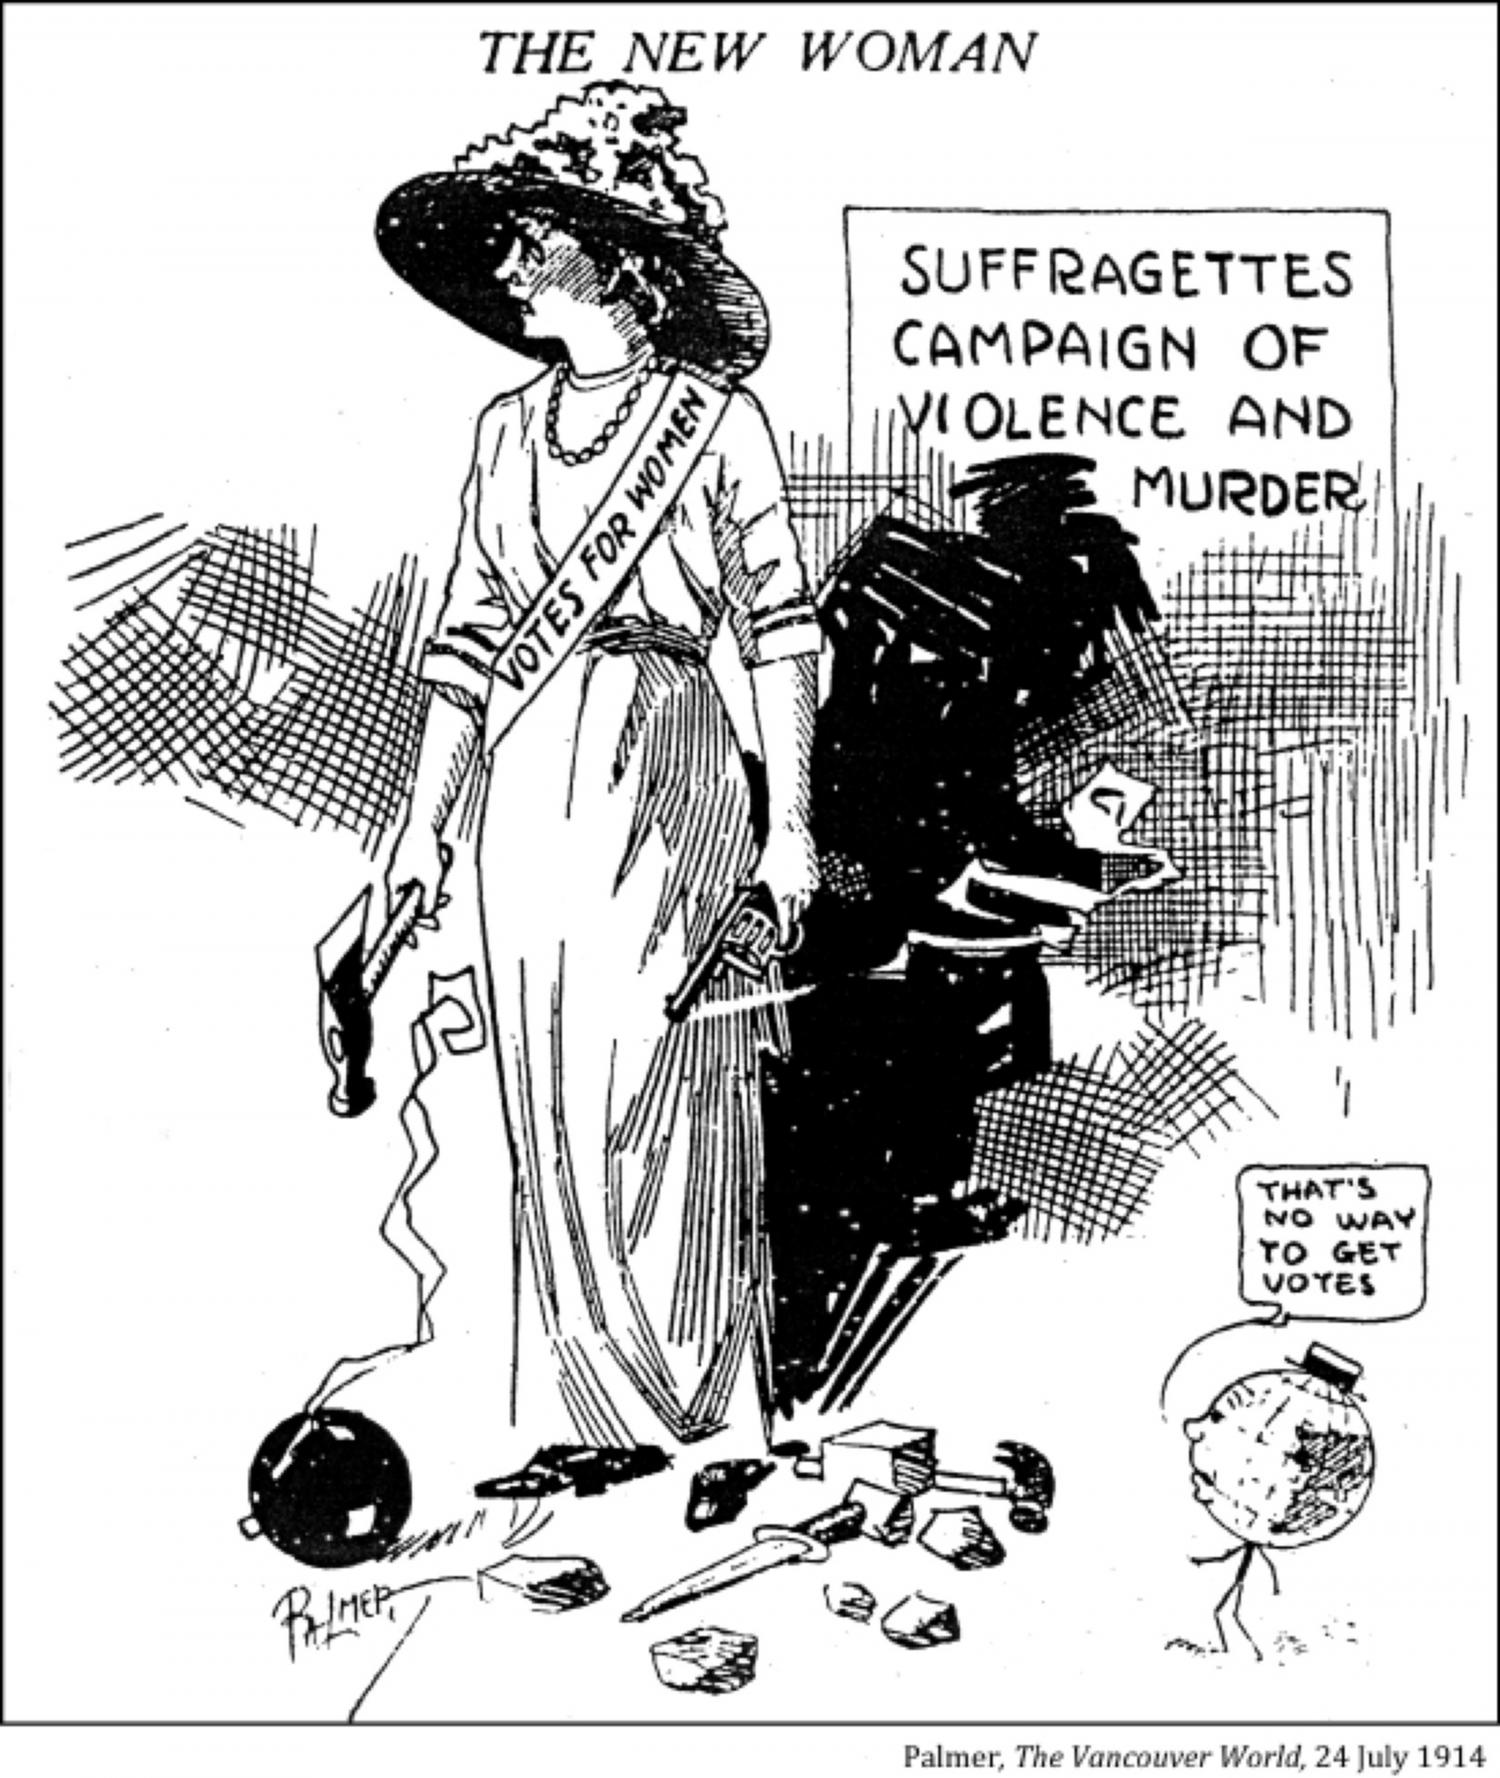 Depicts a woman with an axe, gun, bomb, and knife wearing a sash that reads "votes for women" while little "world" illustration says "That's no way to get votes."